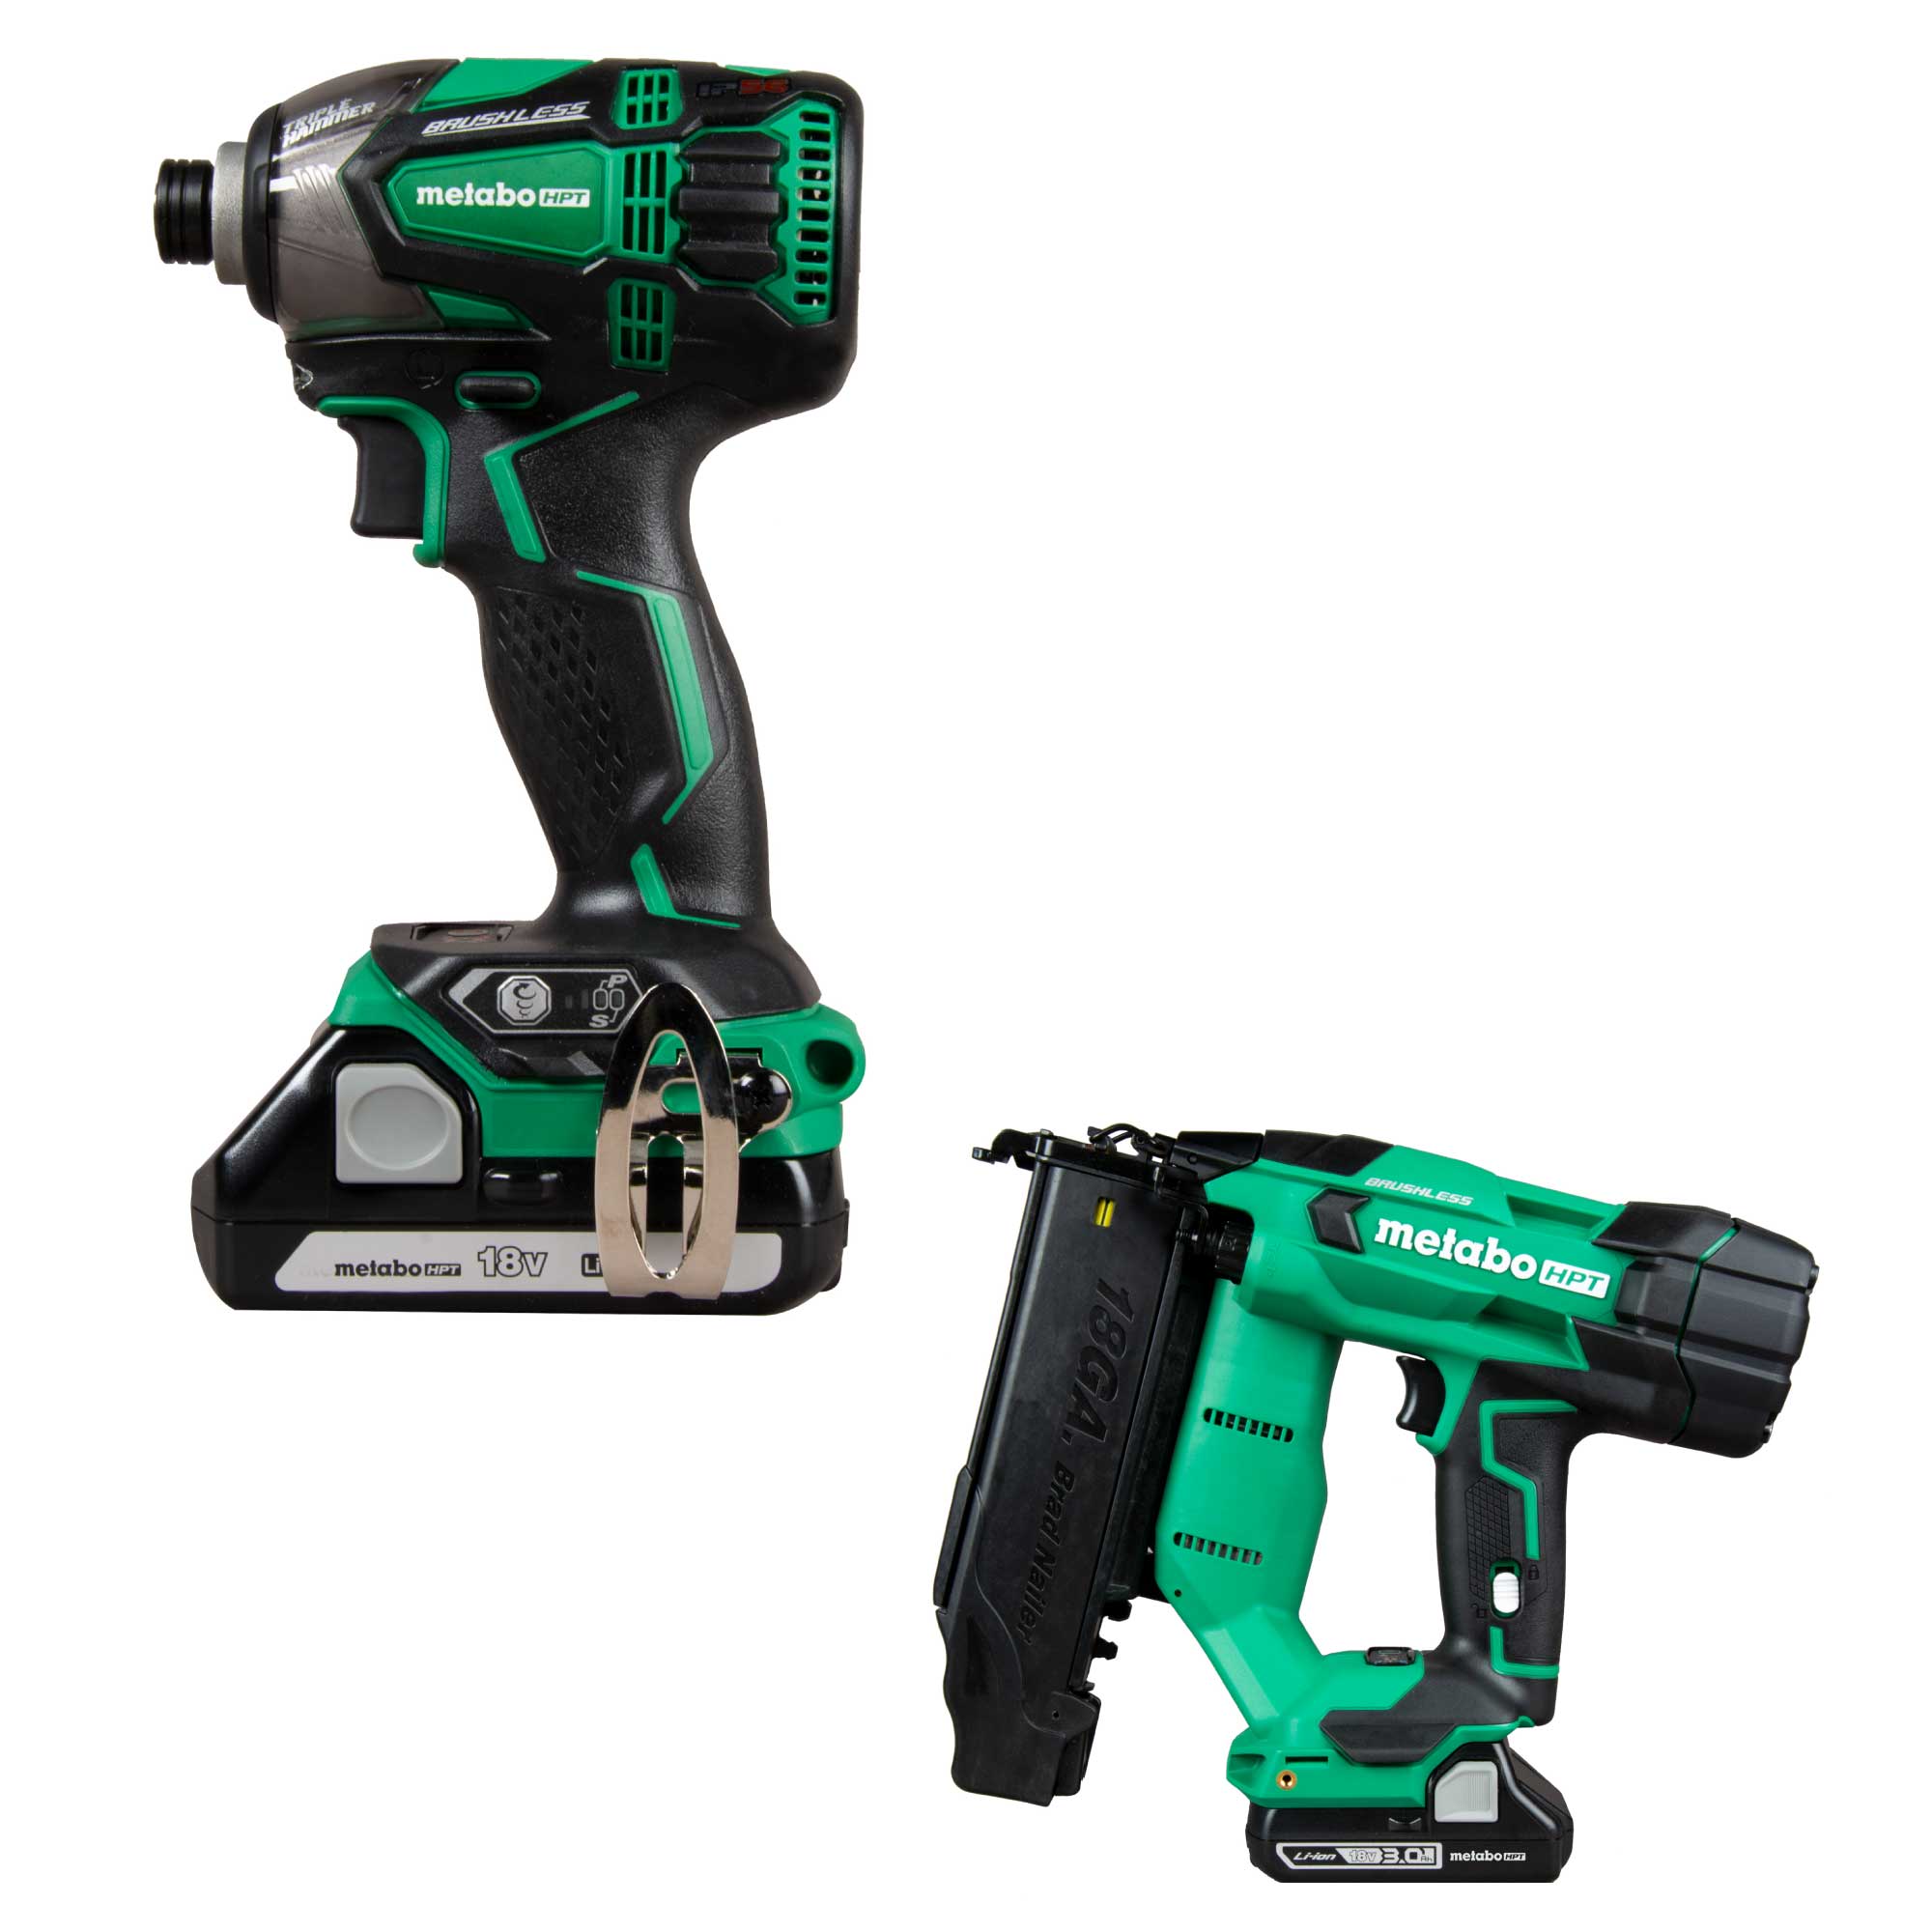 Metabo HPT MultiVolt 18-volt 1/4-in Variable Speed Brushless Cordless Impact Driver (2-batteries included) with MultiVolt 18-Gauge 18-volt Cordless